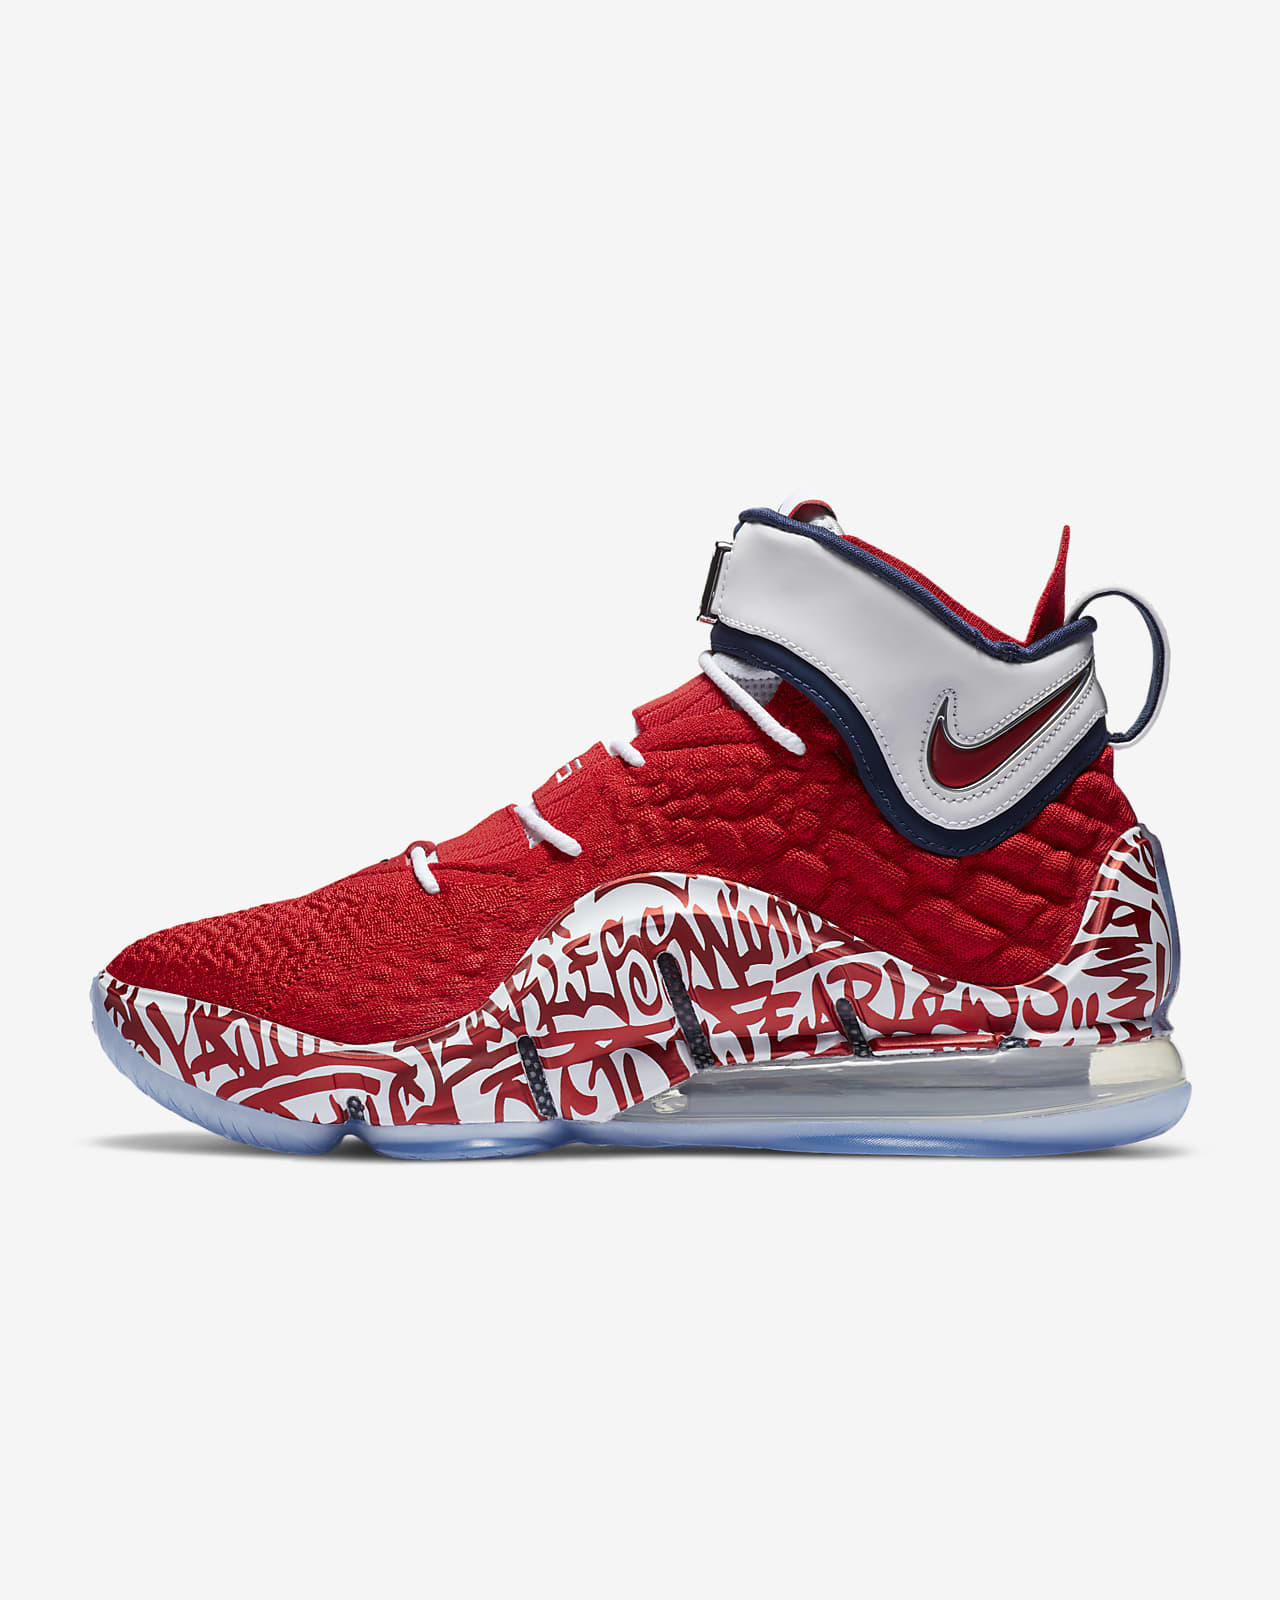 lebrons 17 red